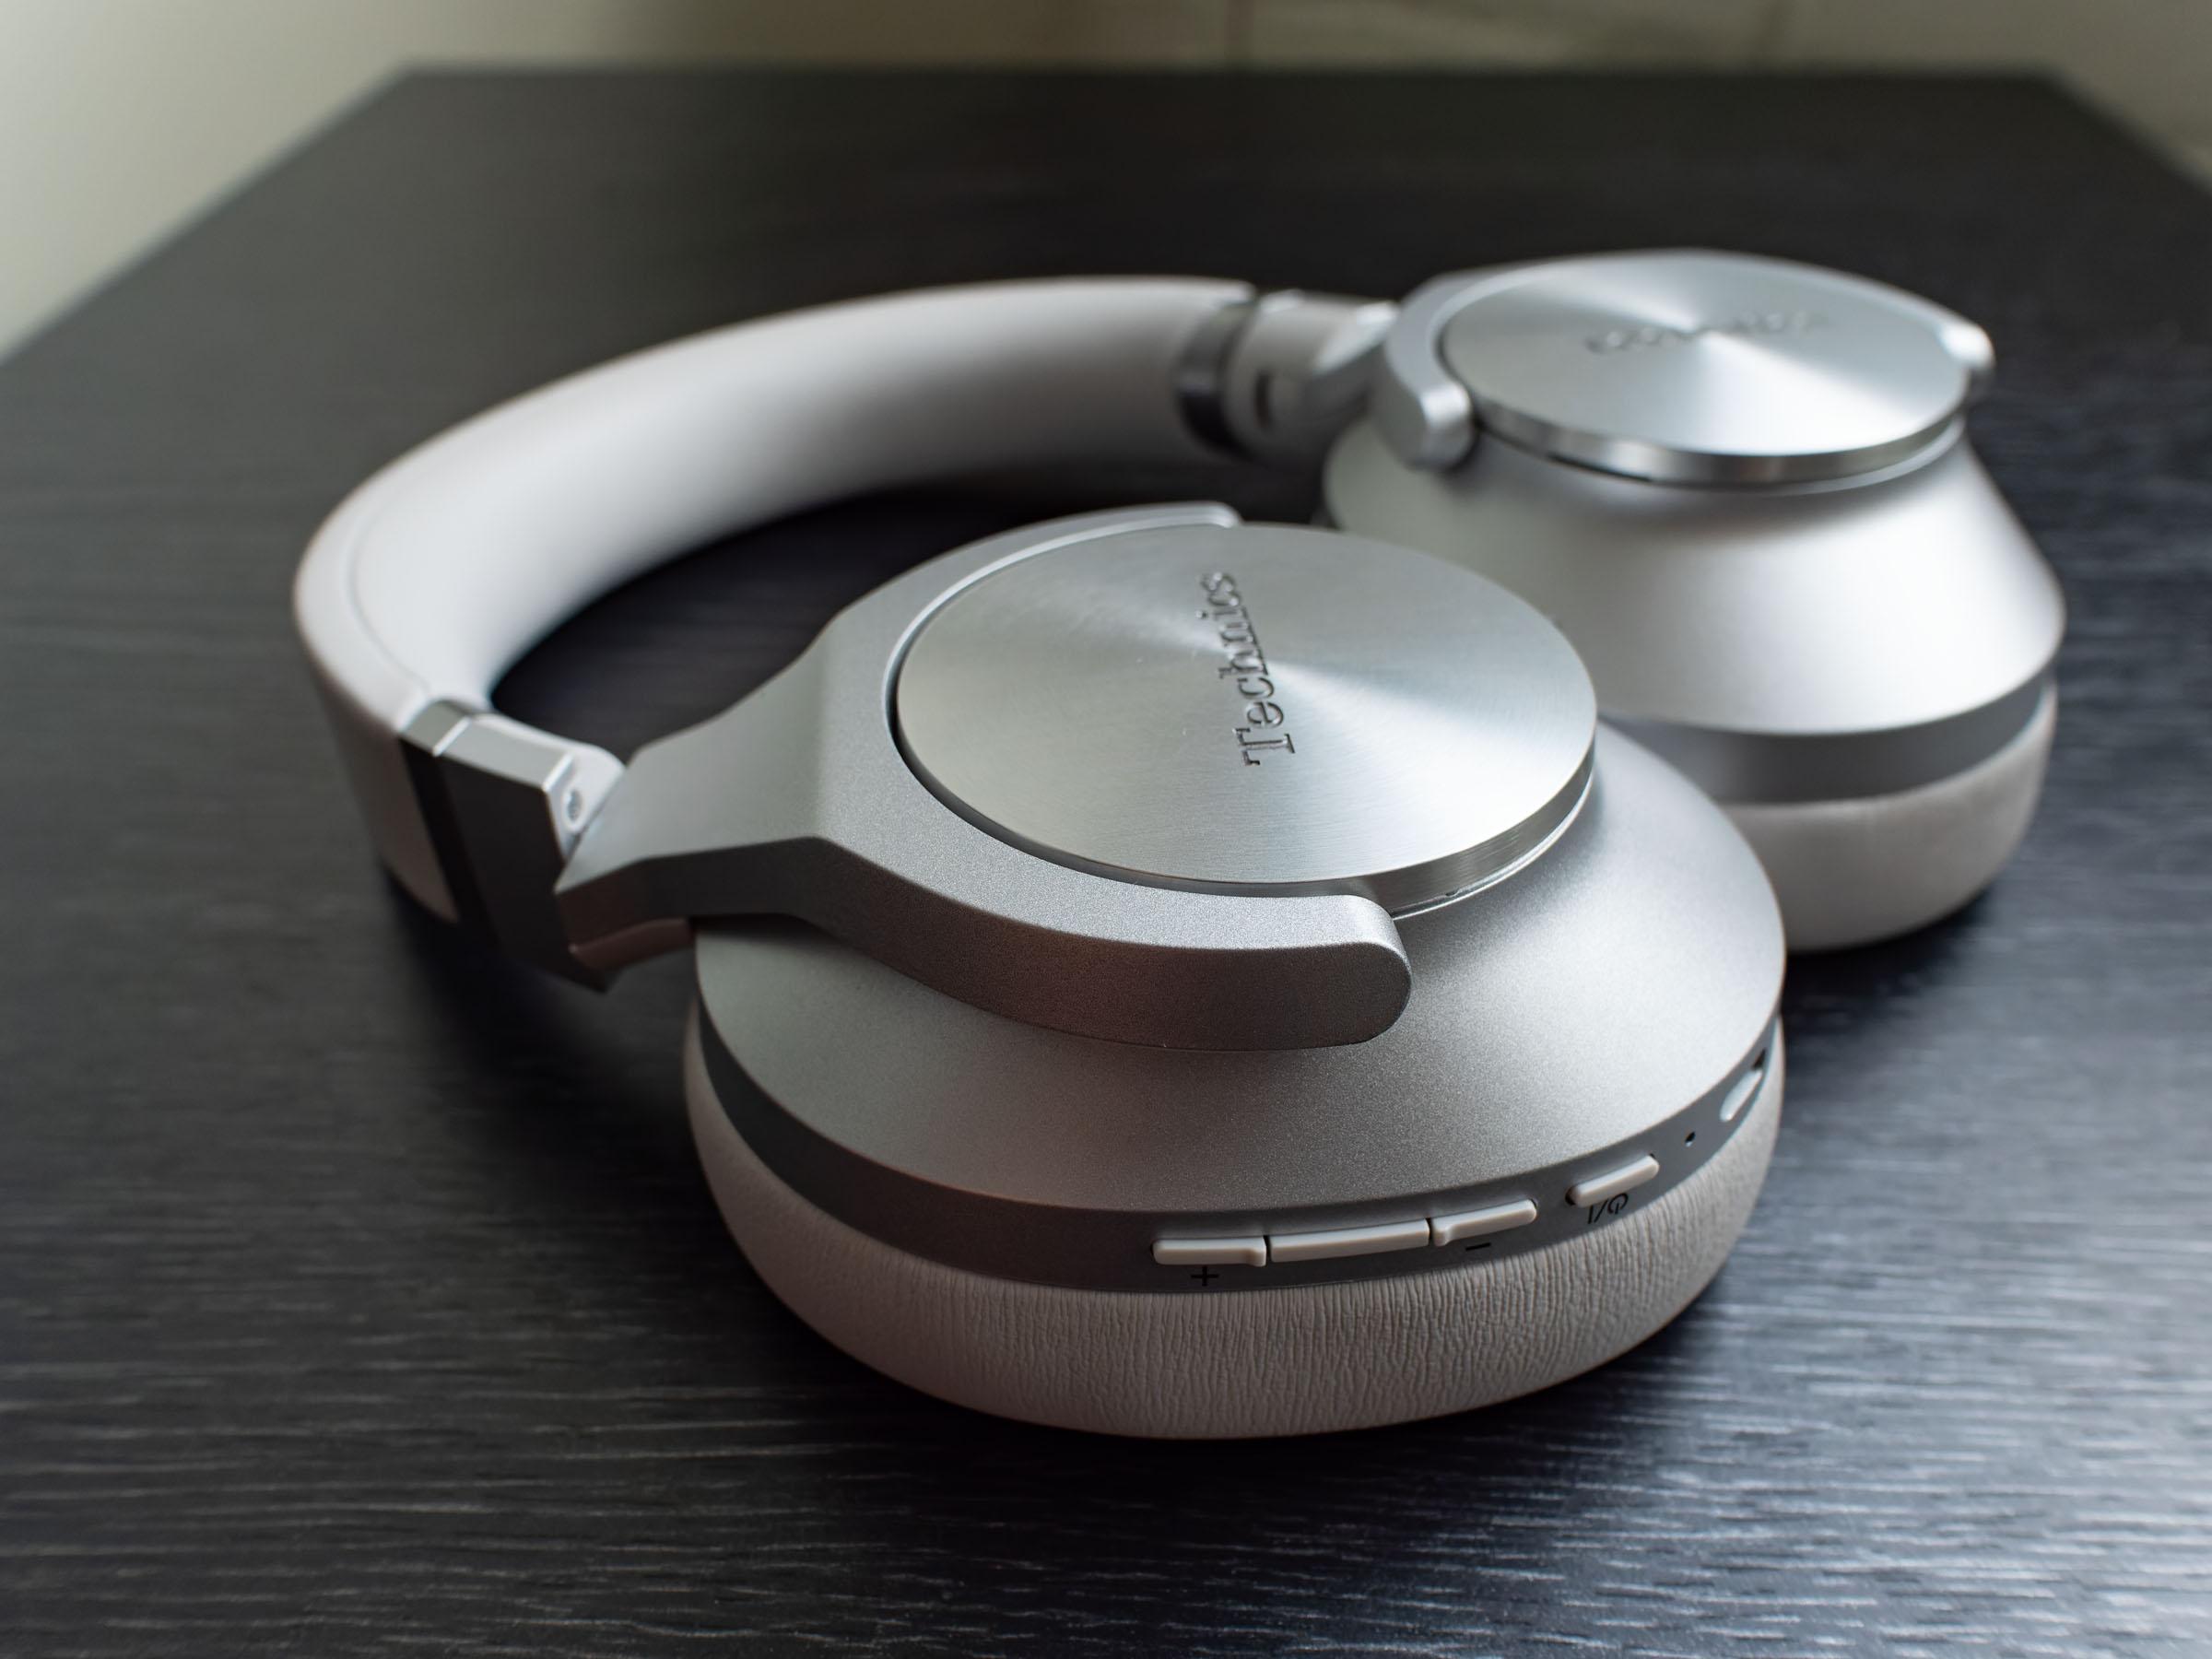 Premium headphones that are flashy, comfortable, and fun to listen to. 15411274 p1013078